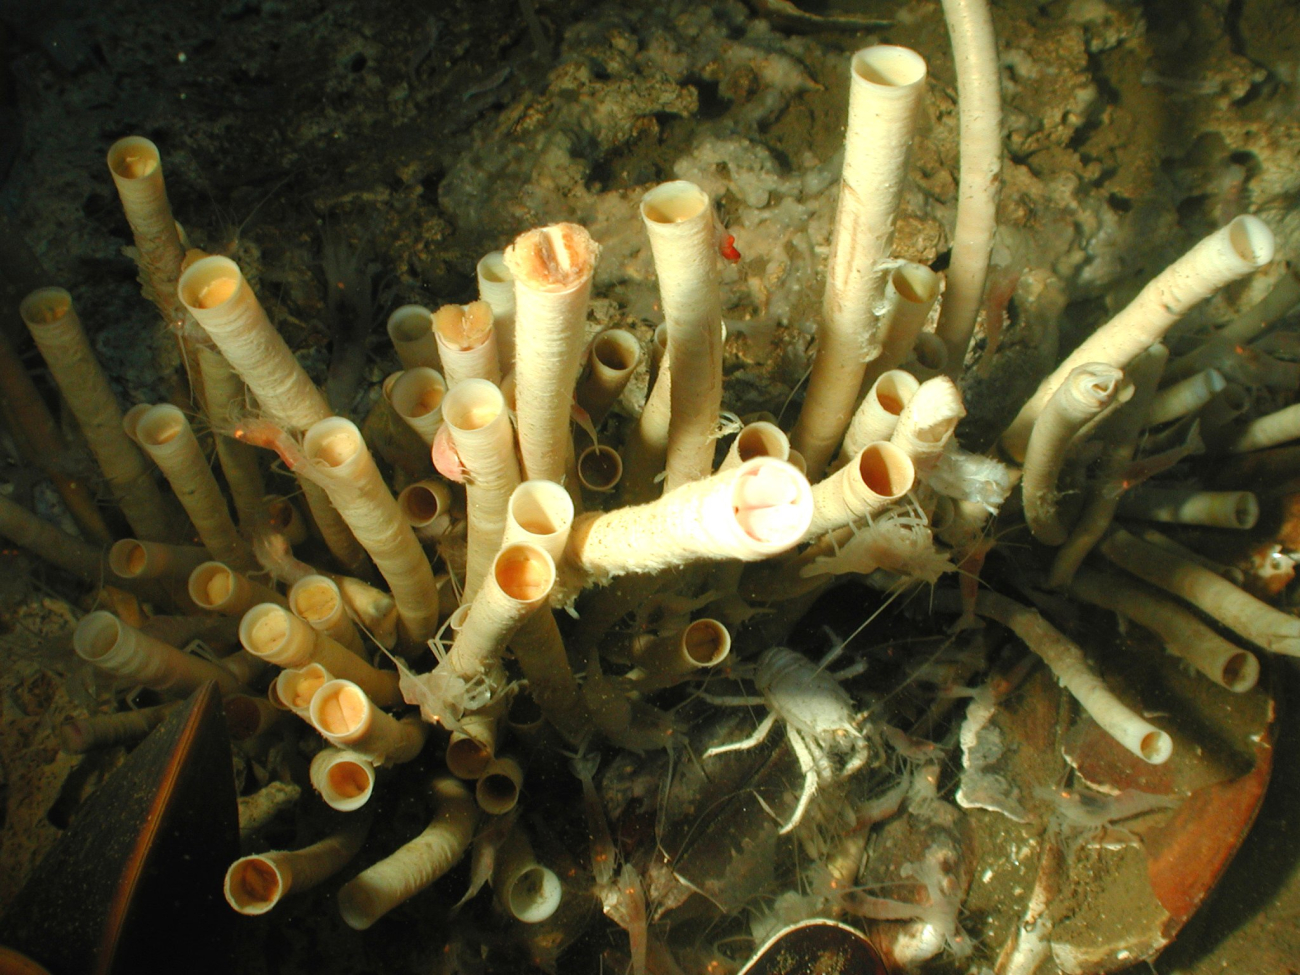 A cold seep community of tube worms, squat lobster, white shrimp, andmussel shells